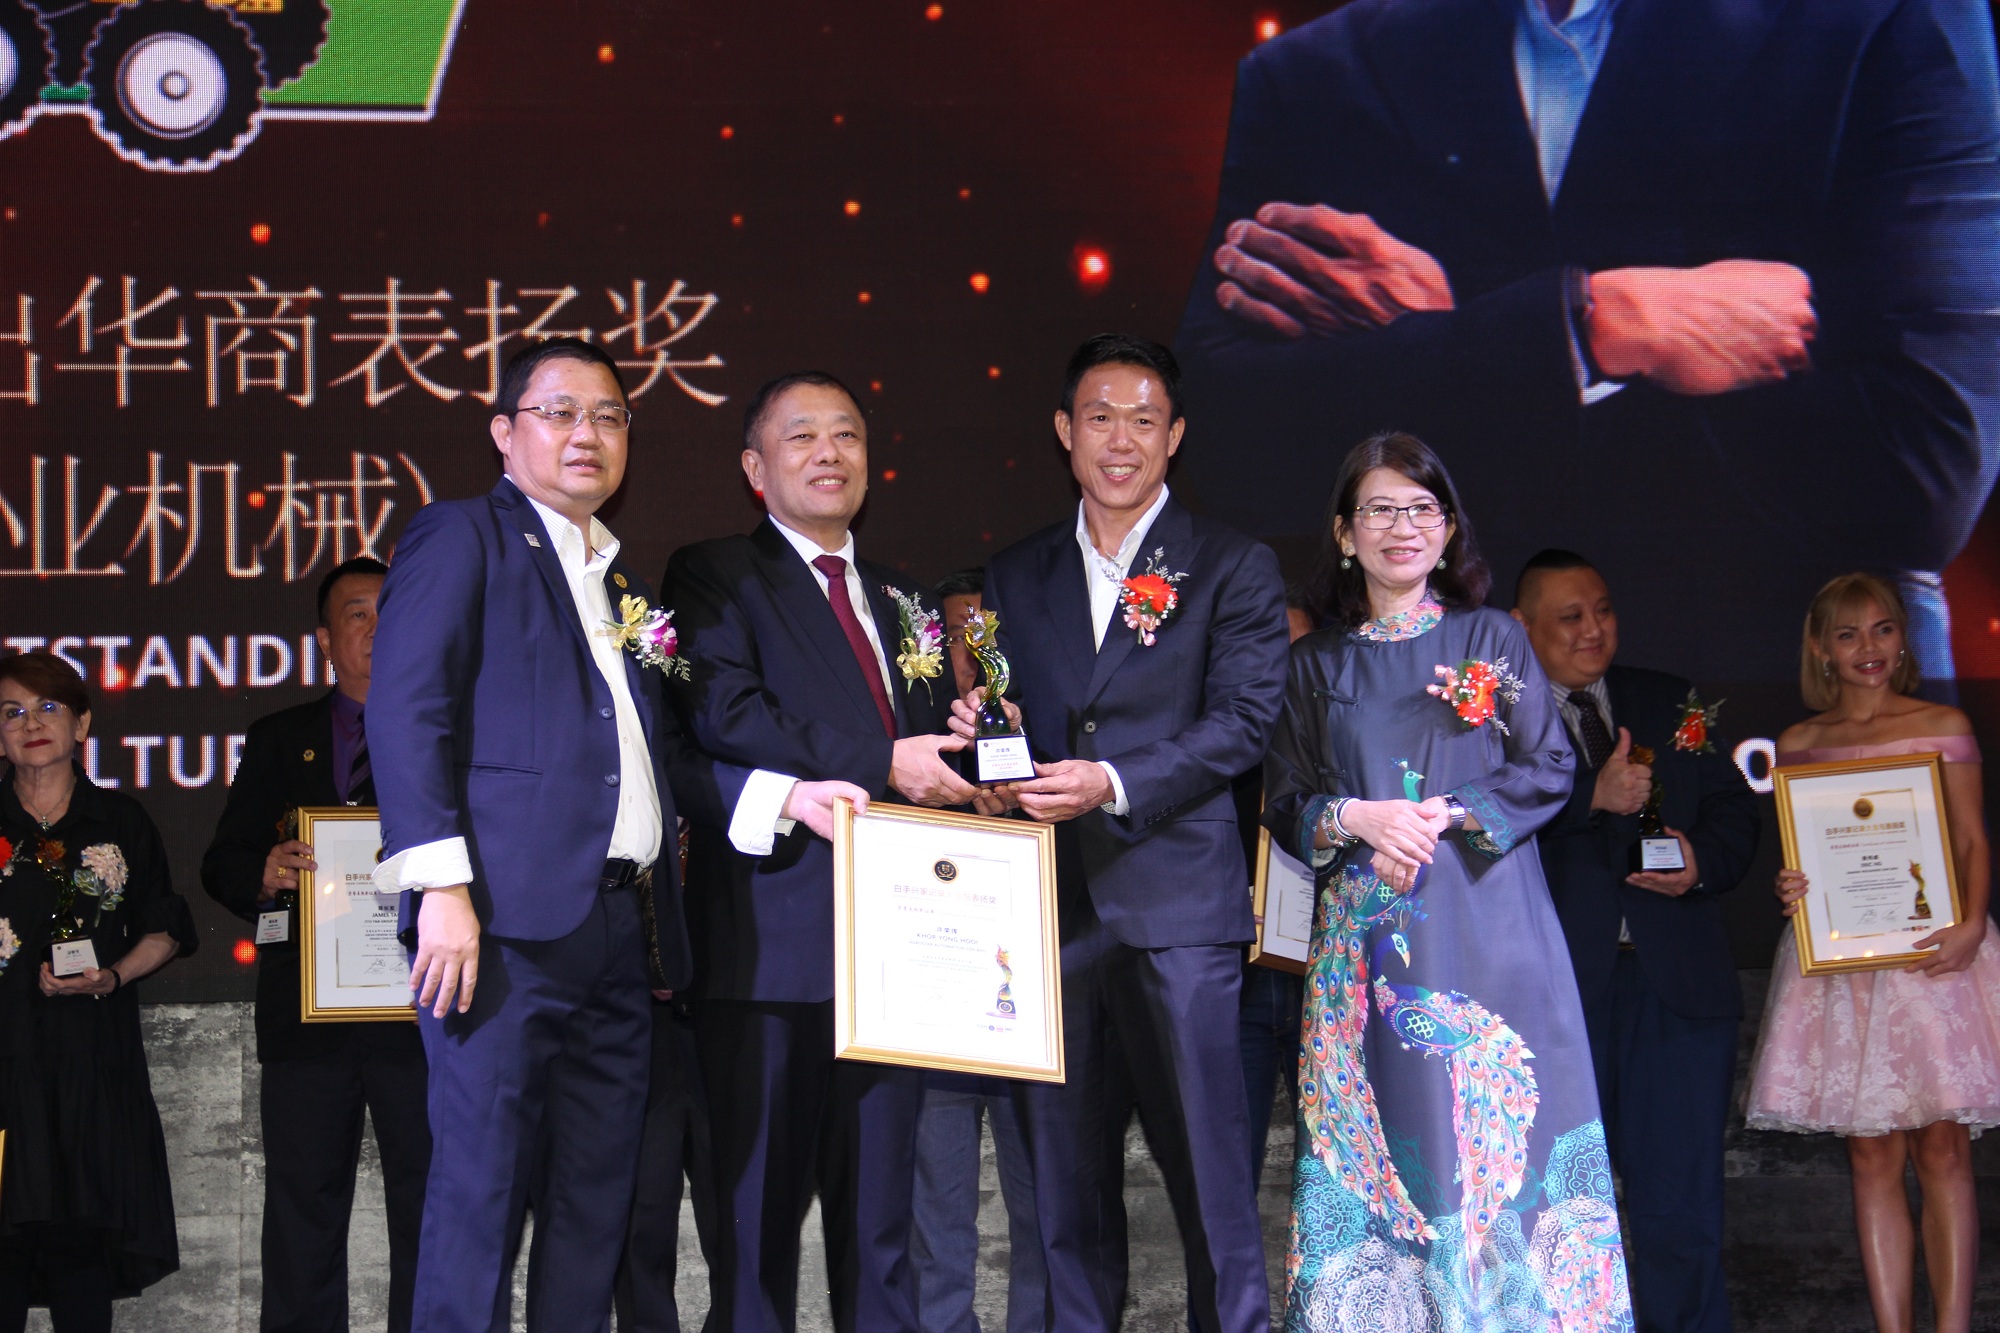 Xu Ronghui won the ASEAN Outstanding Chinese Entrepreneur Award (agricultural machinery industry).